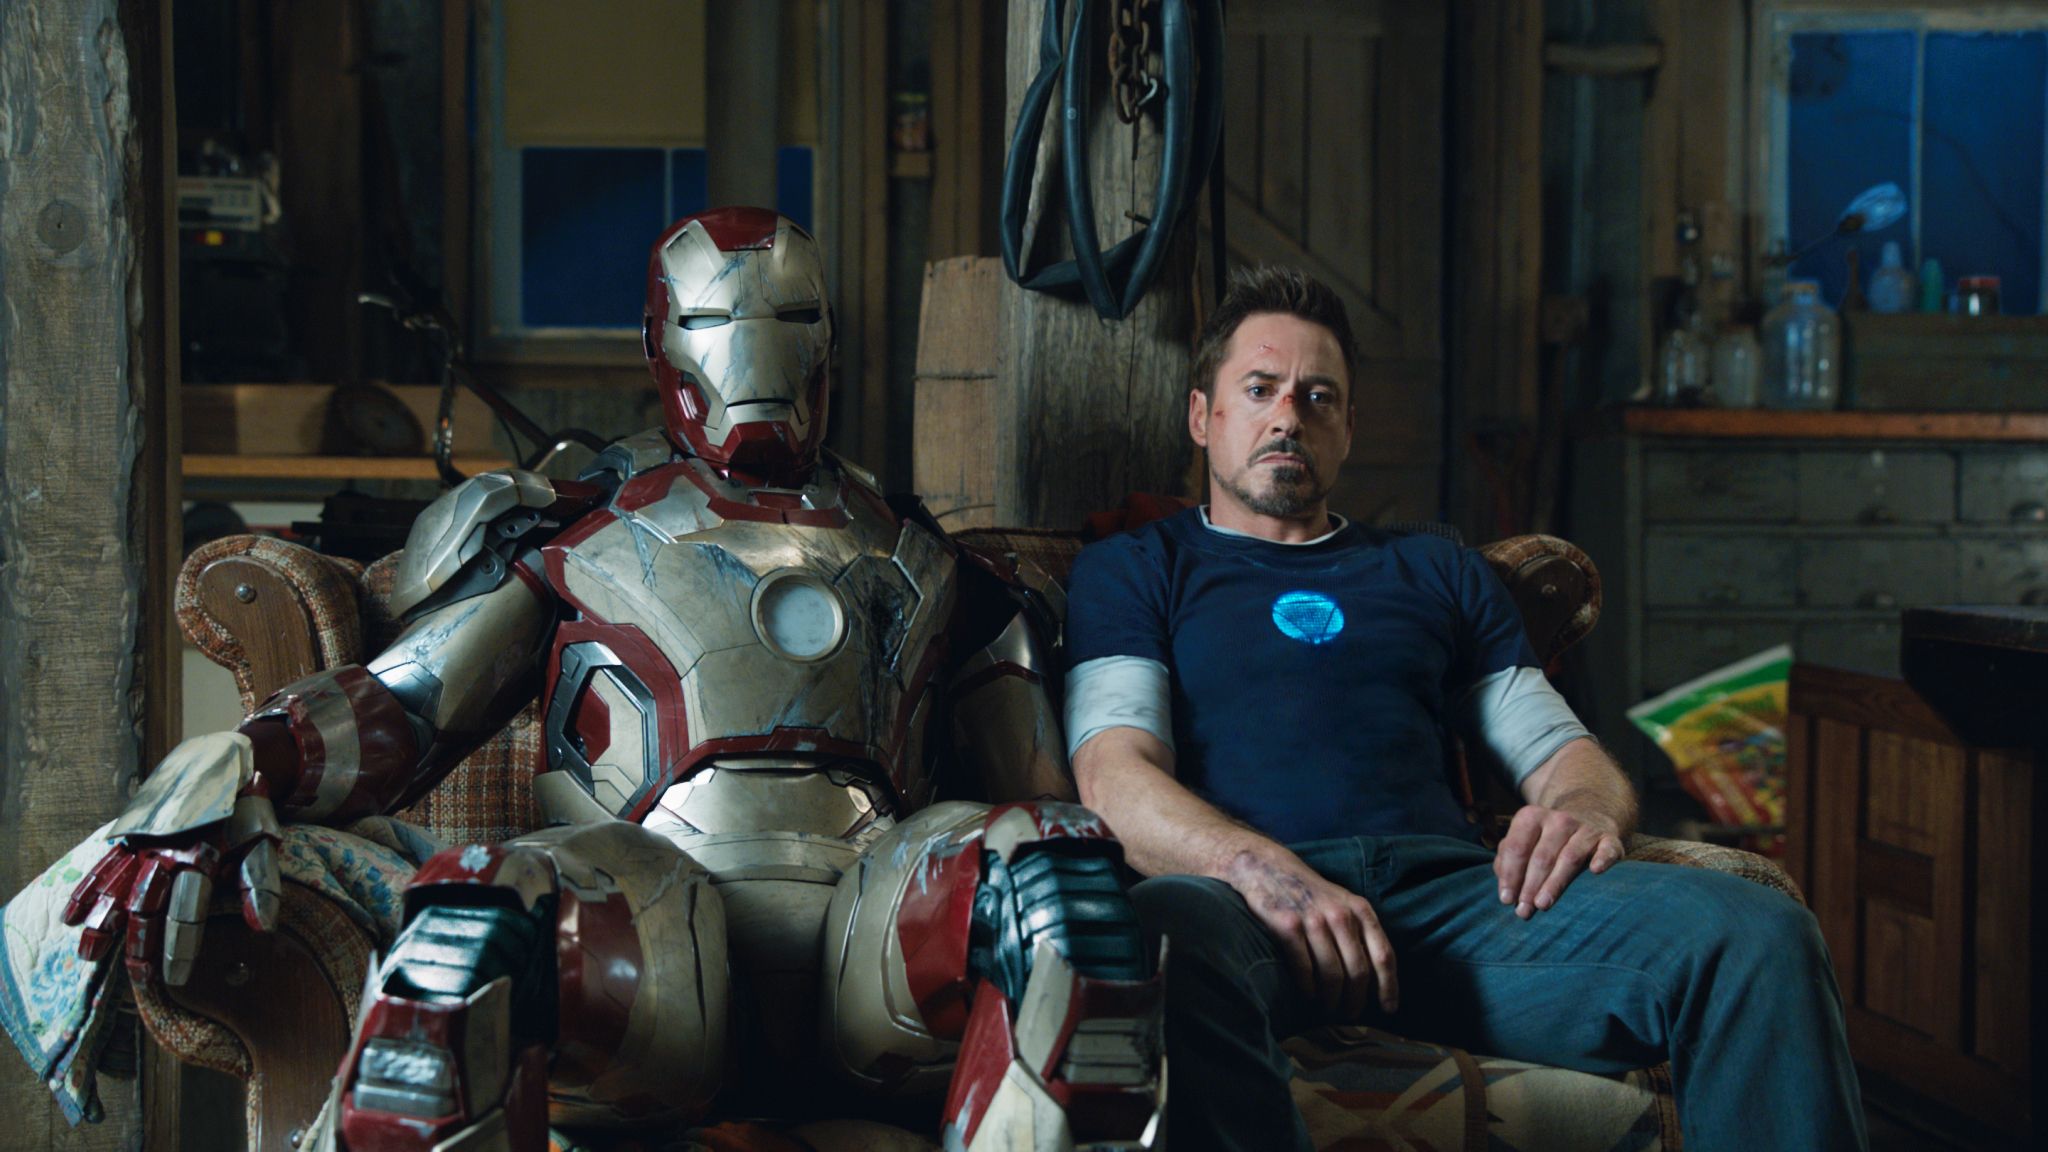 The Iron Man 3 Retro Review: The Road to Civil War Part 1